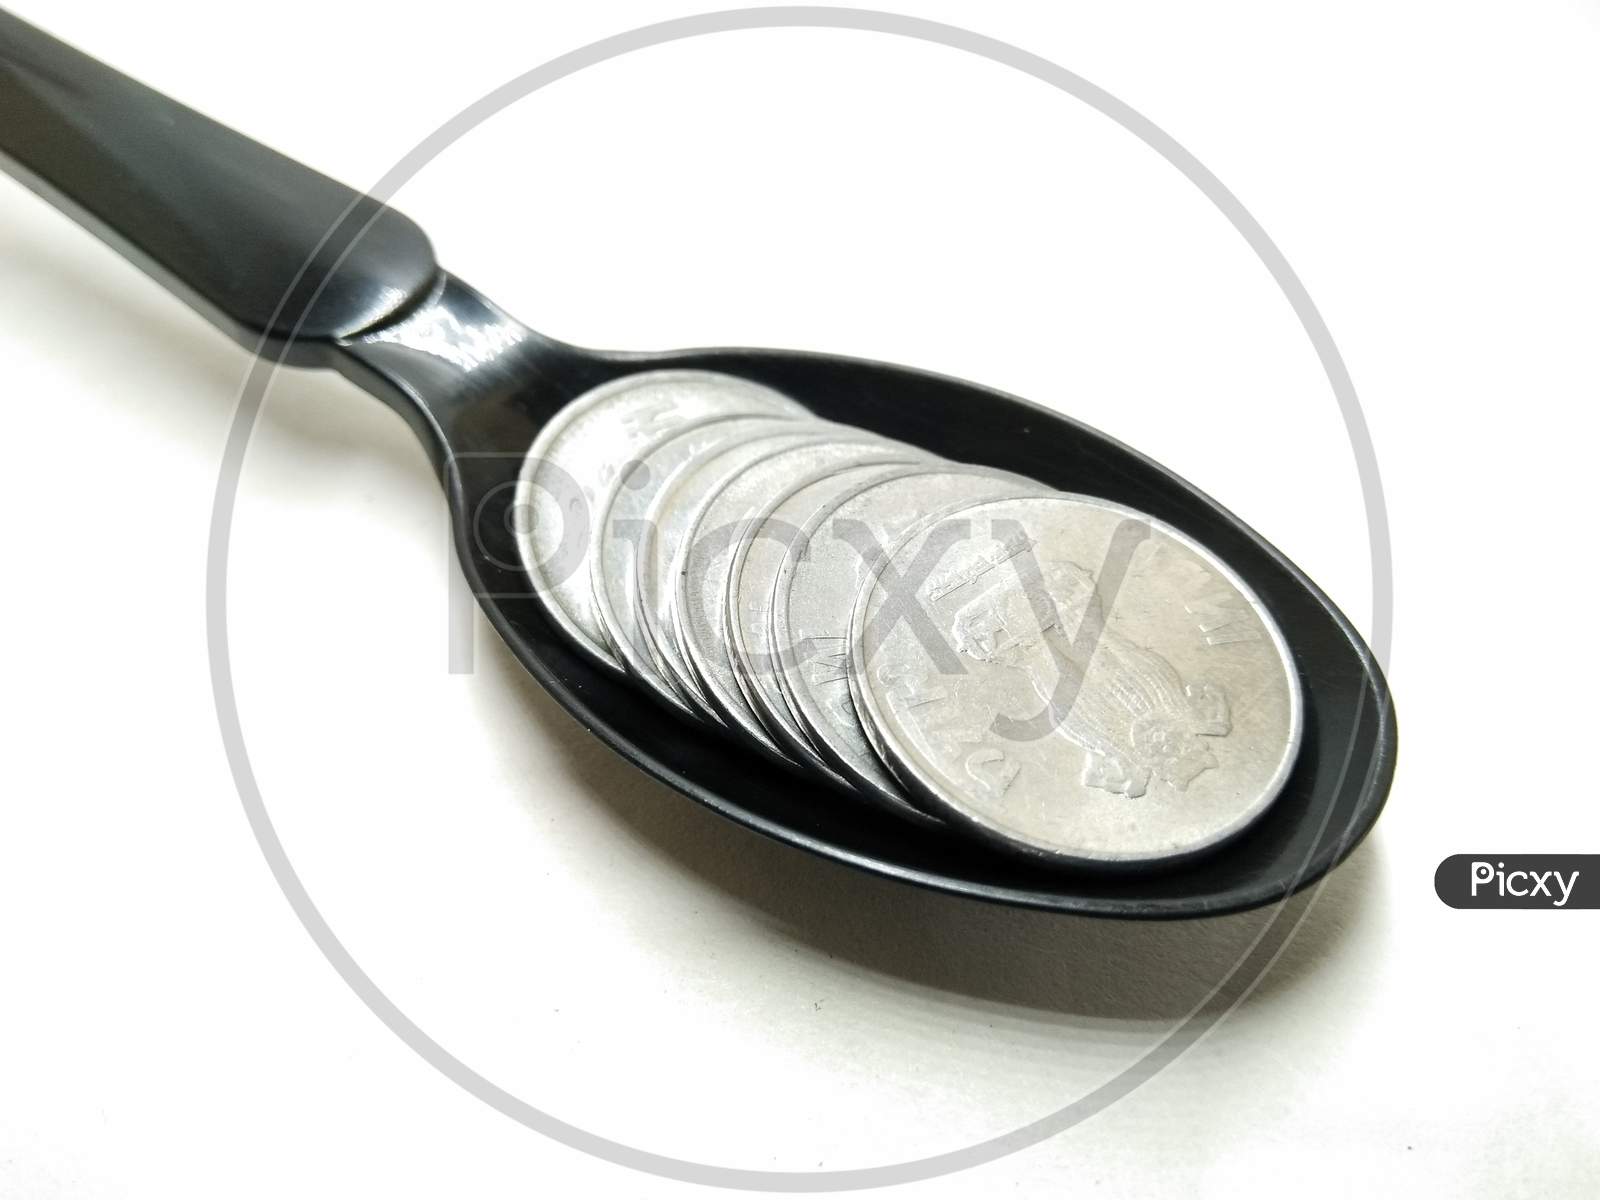 Indian Currency Rupee Coin in Spoon  Over an Isolated White Background